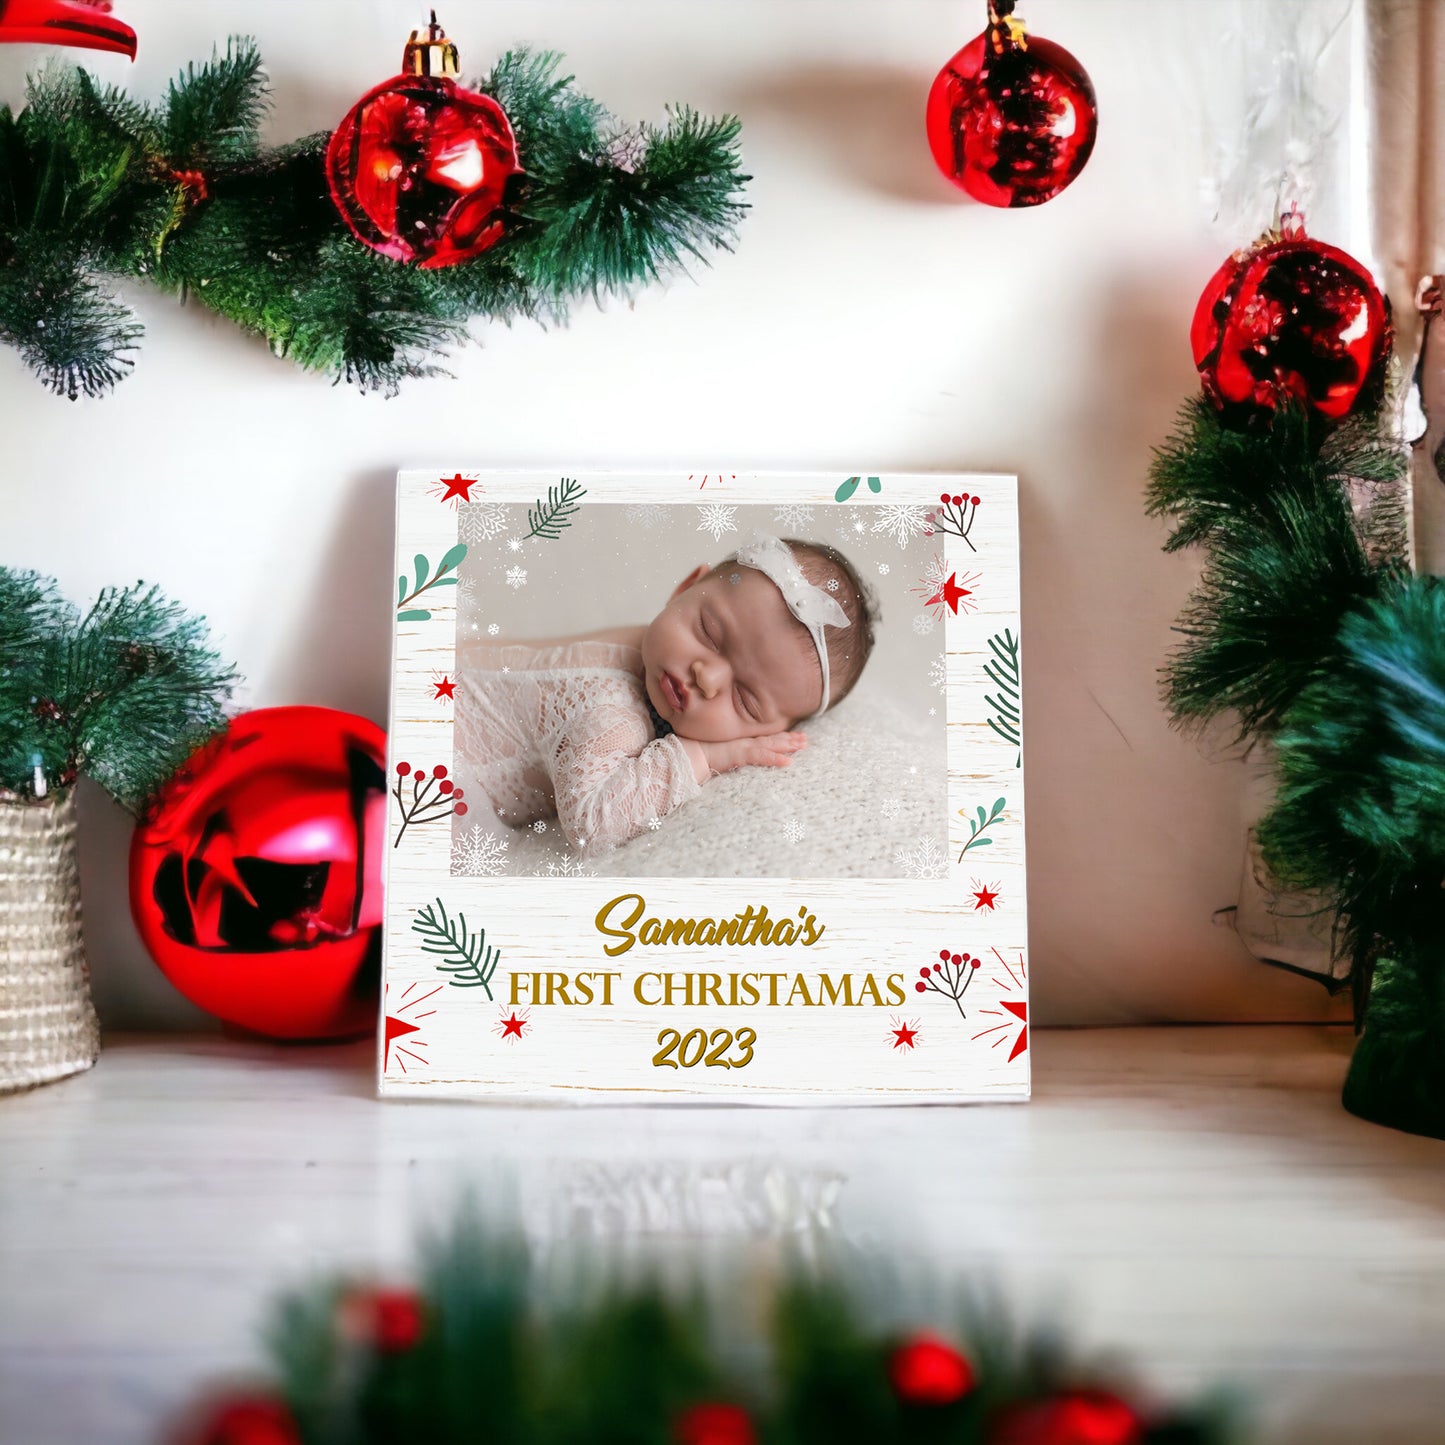 My First Christmas Personalized Wooden Sign with Baby Photo - Unique Gift